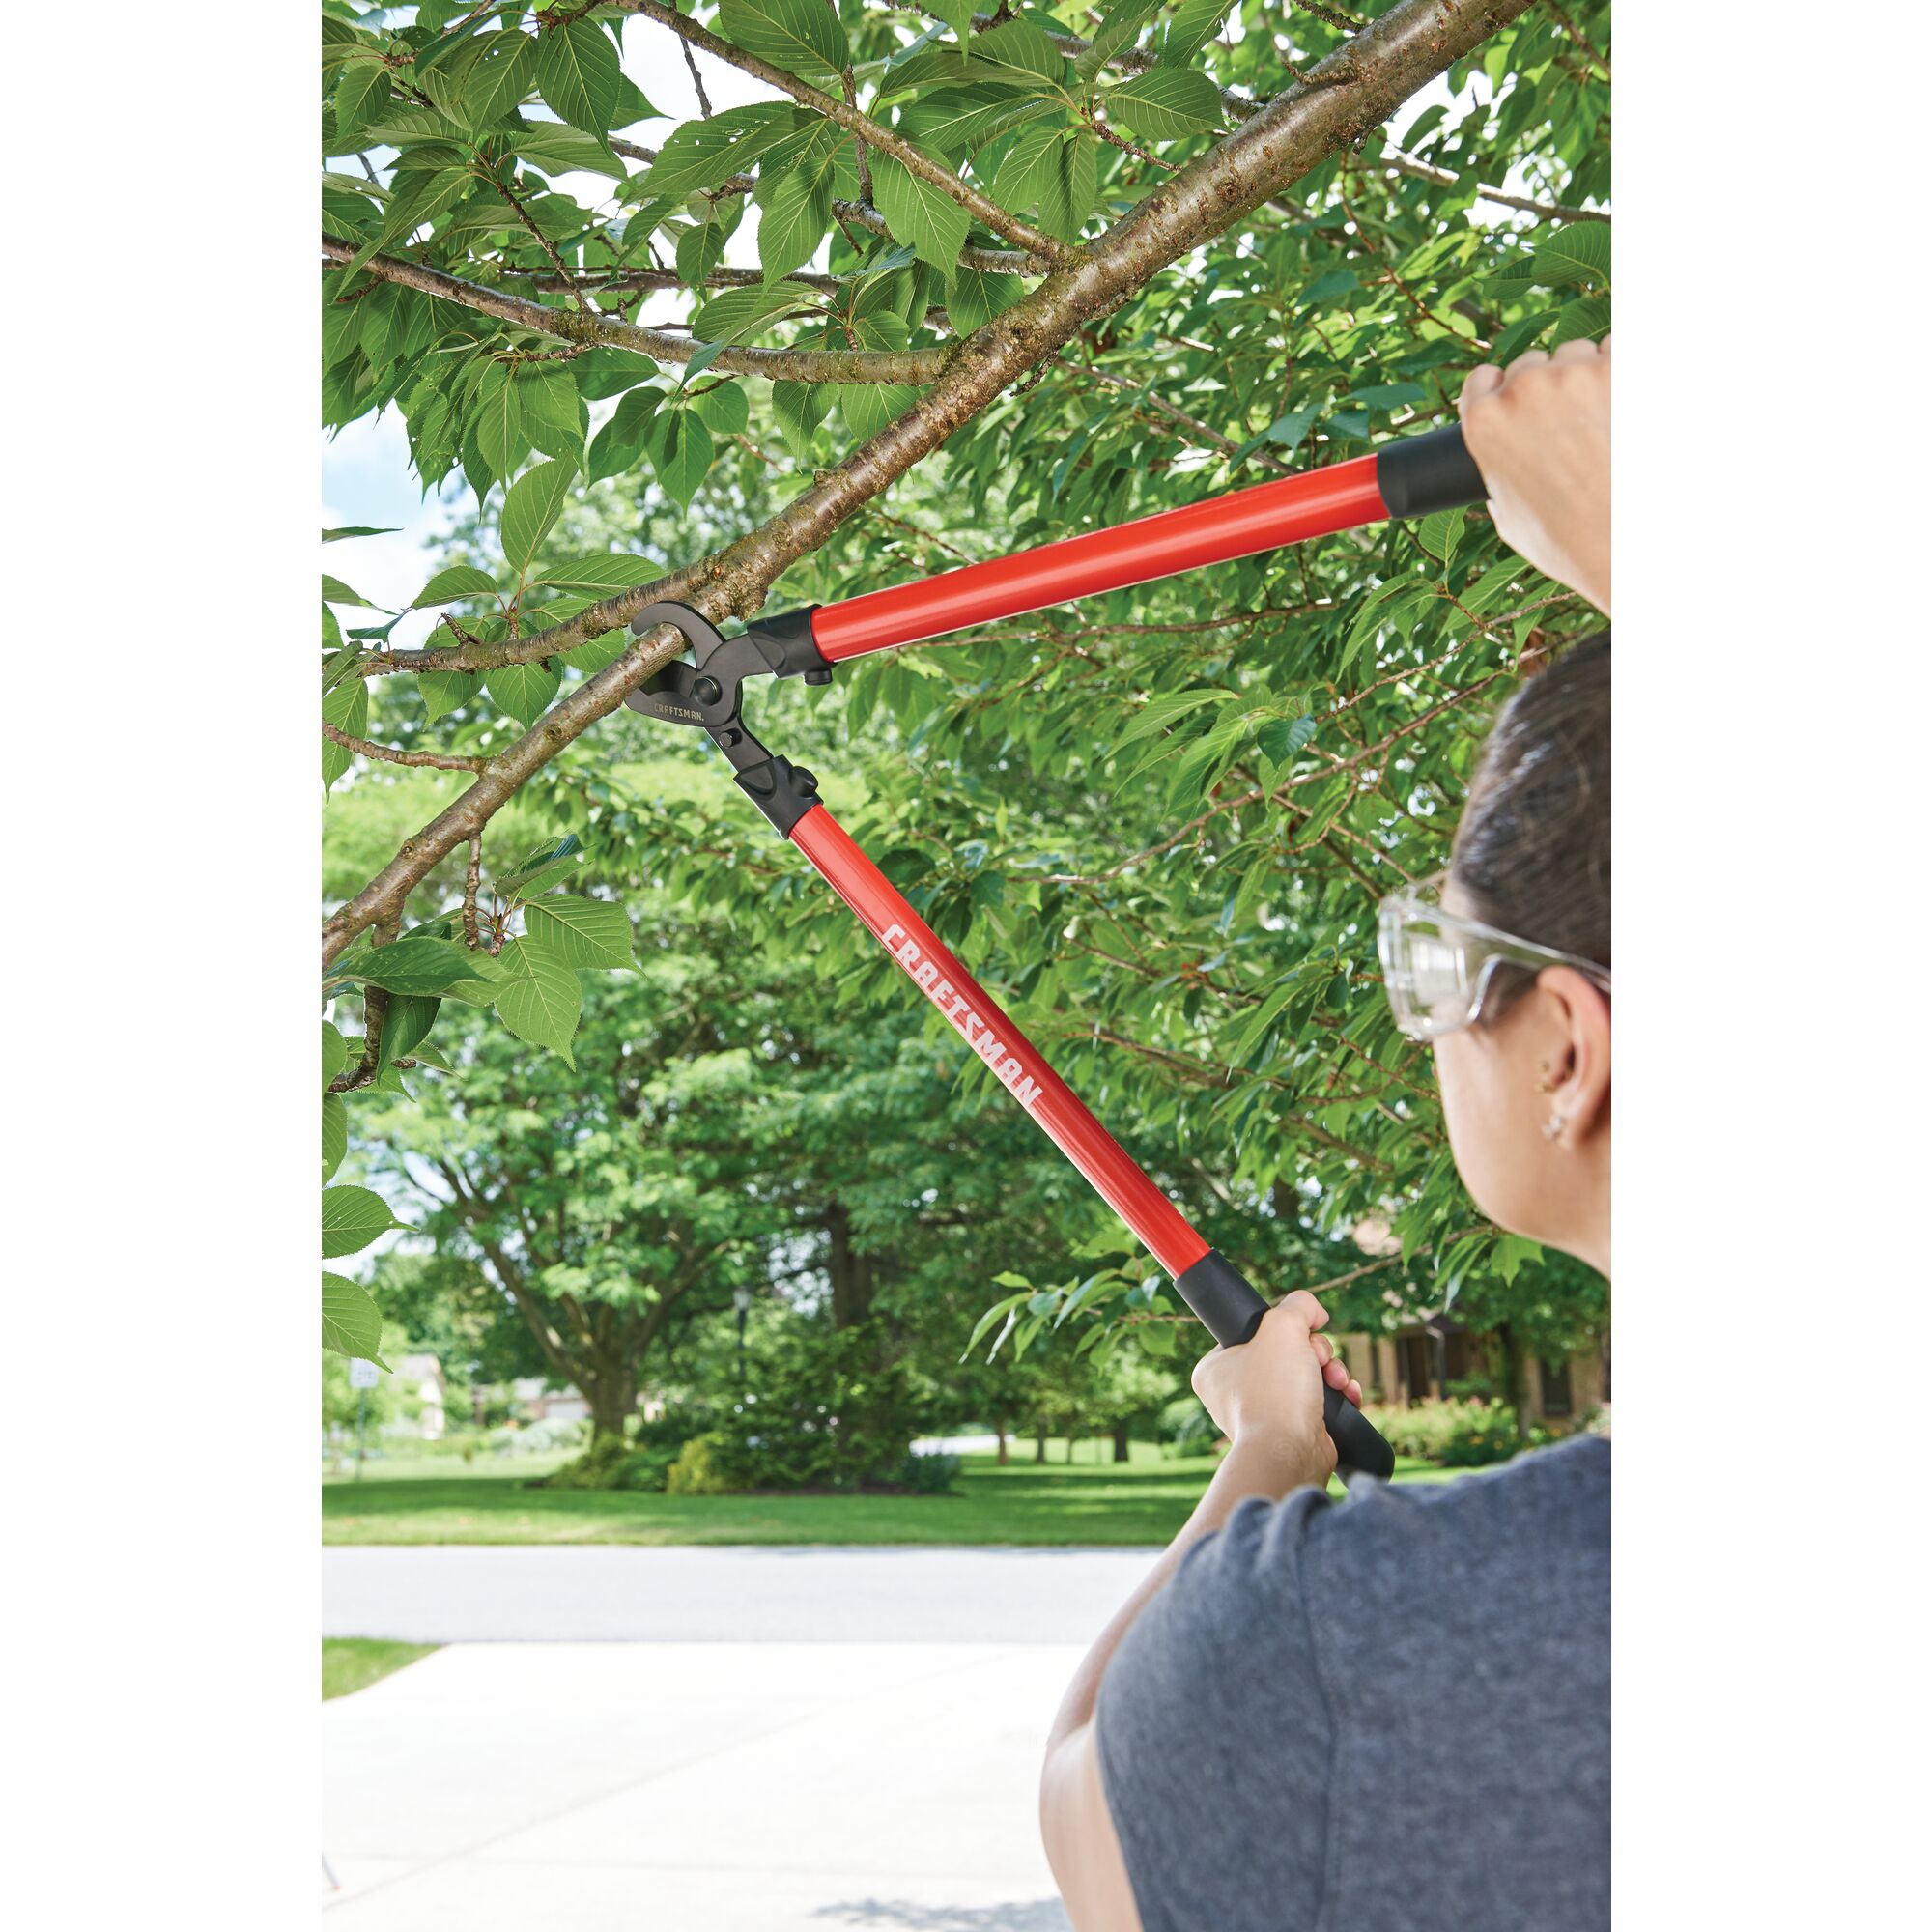 Bypass lopper being used by a person to trim a branch.